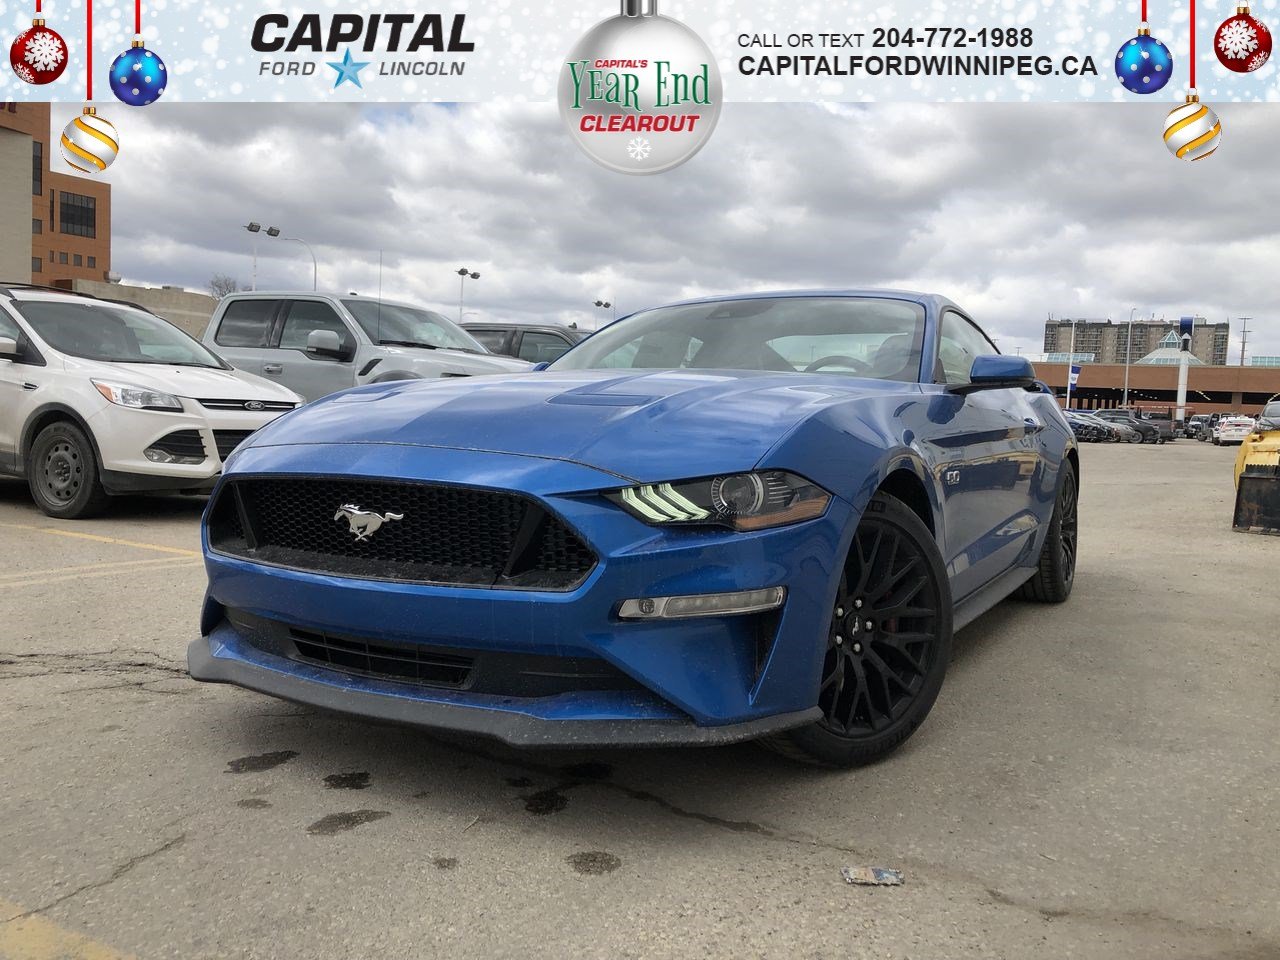 New 2019 Ford Mustang Gt Premium Performance Pack Adaptive Cruise Heated Seats With Navigation Stock P2401